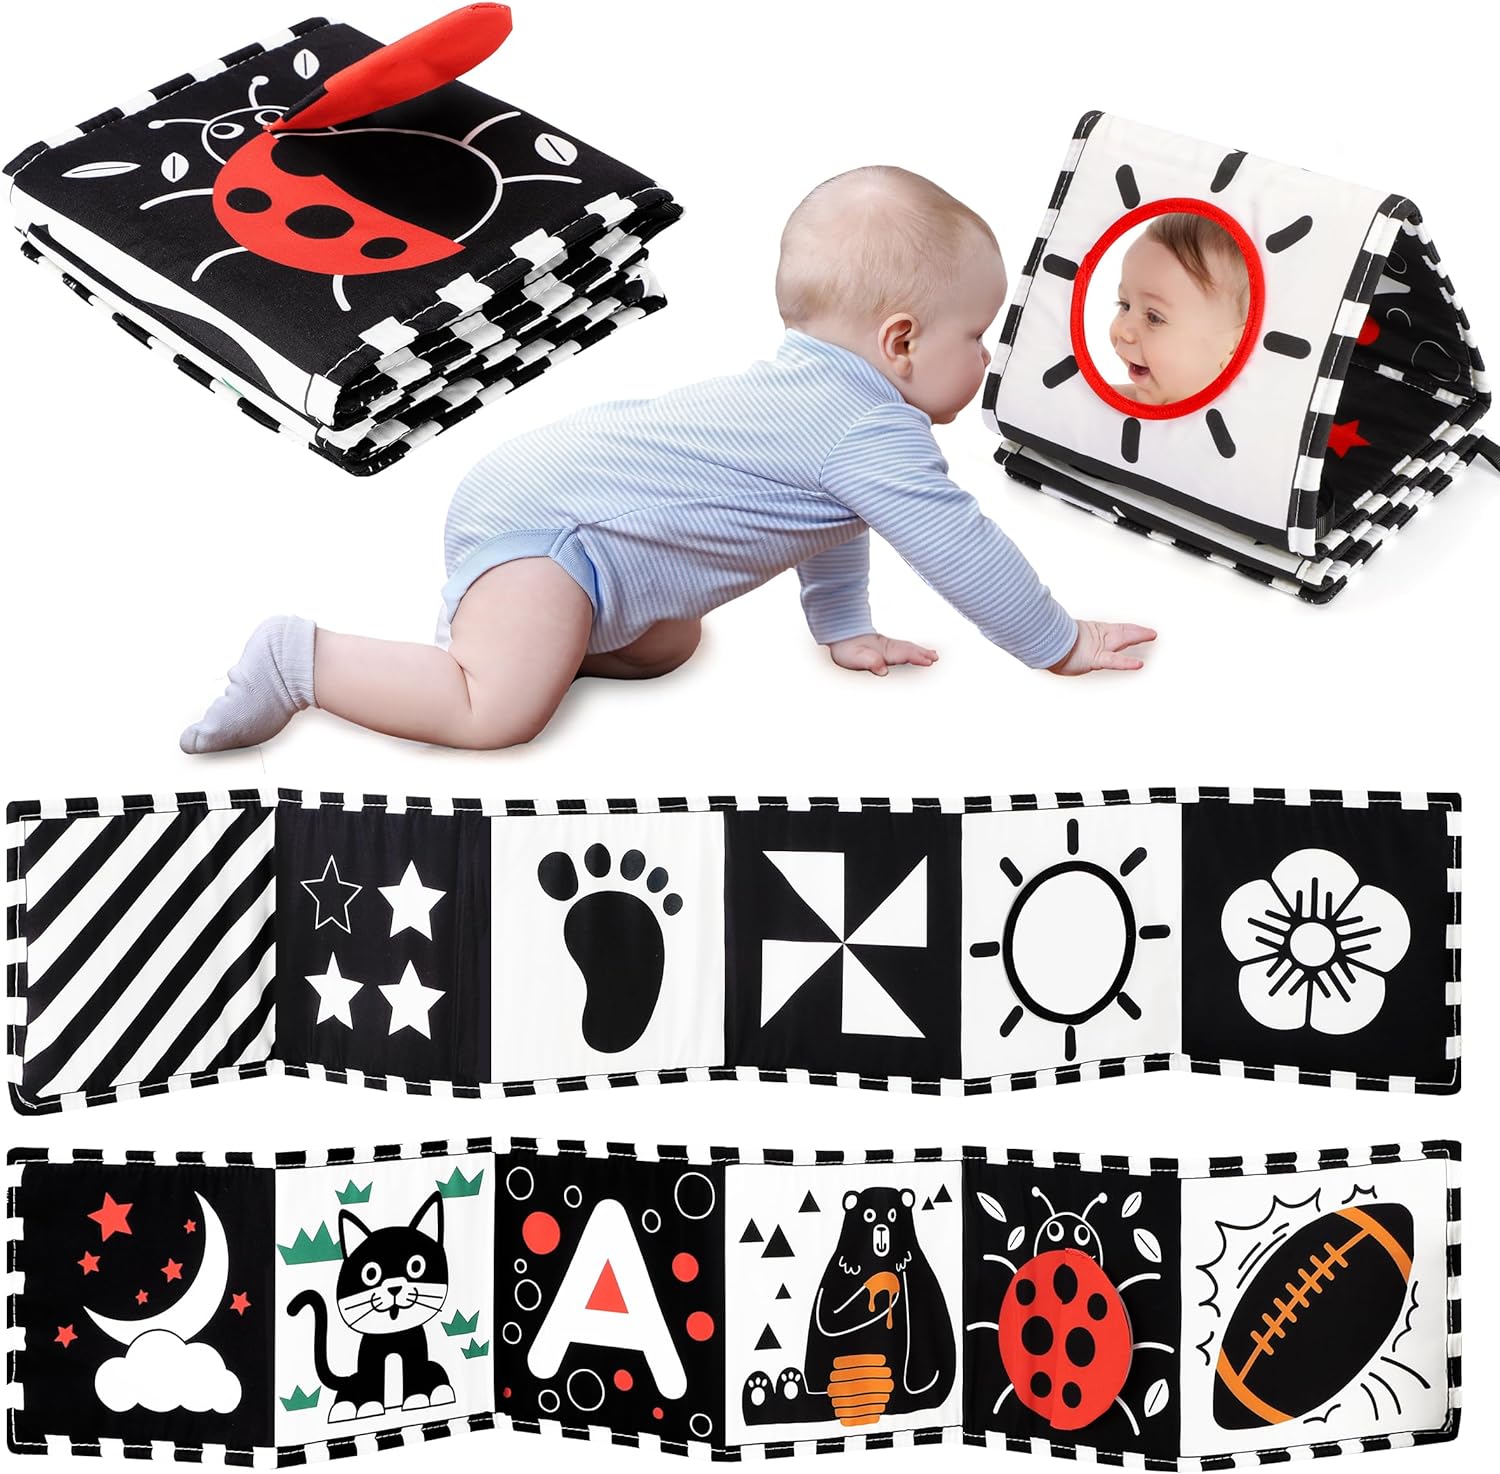 Black and White Baby Toys, High Contrast Newborn Toys 0-3 Months Brain Development, Tummy Time Toys, Soft Baby Book, Infant Sensory Crinkle Toys 0-6-12 Months Visual Stimulation Montessori Toy Gift